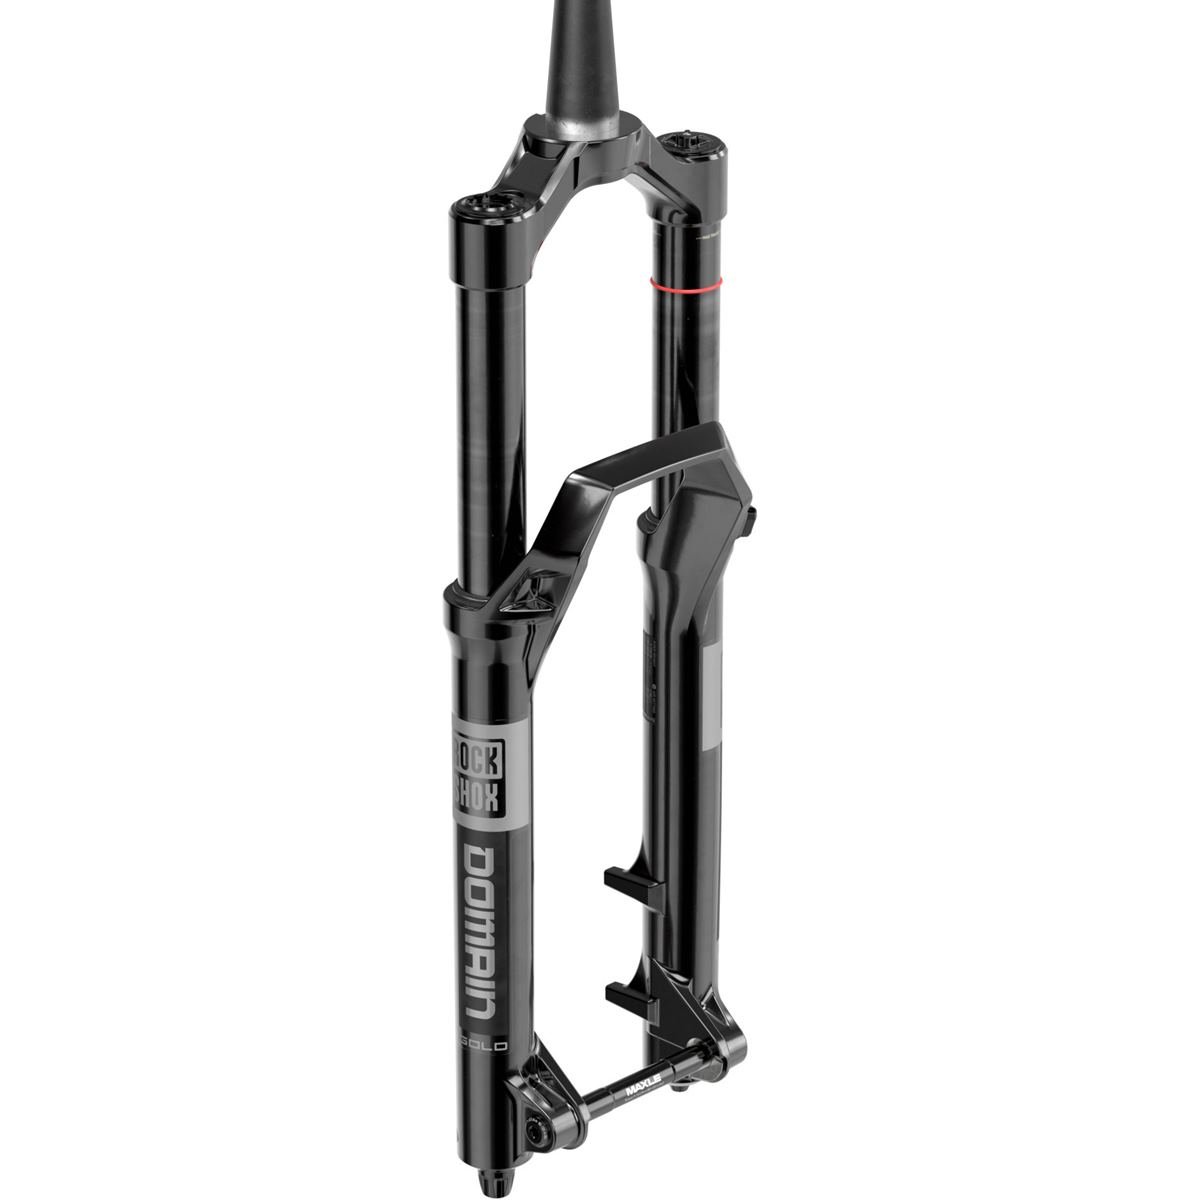 RockShox Forcella Domain Gold Isolator RC3 27.5 Pollici, 15x110 mm, 44 mm Offset